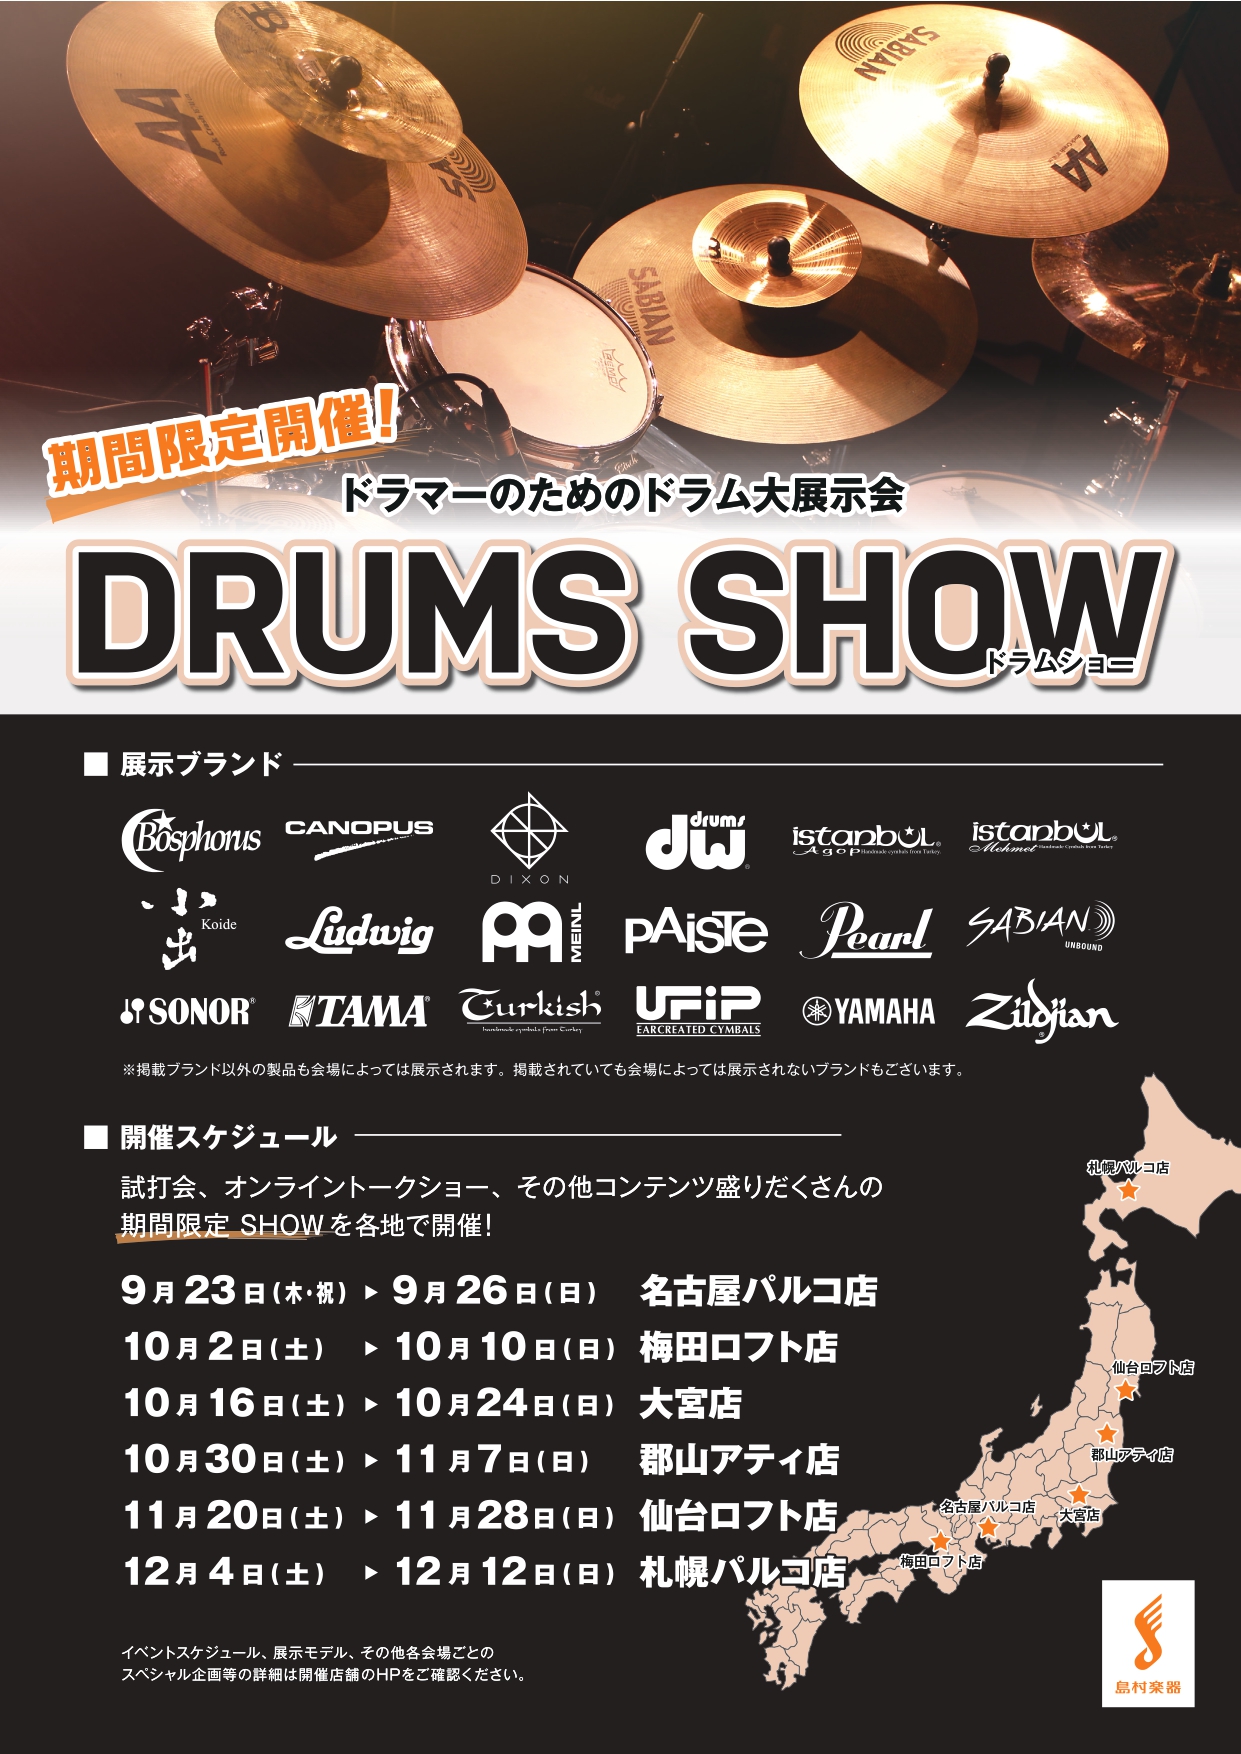 *DRUMS SHOW 2021 ~UNITE~ at 郡山アティ店・仙台ロフト店 [https://info.shimamura.co.jp/drums/article/drums-show-2021::title=] 国内外のドラム/シンバルメーカー製品を一堂に集めた「試せる」「買える」展示会、 […]